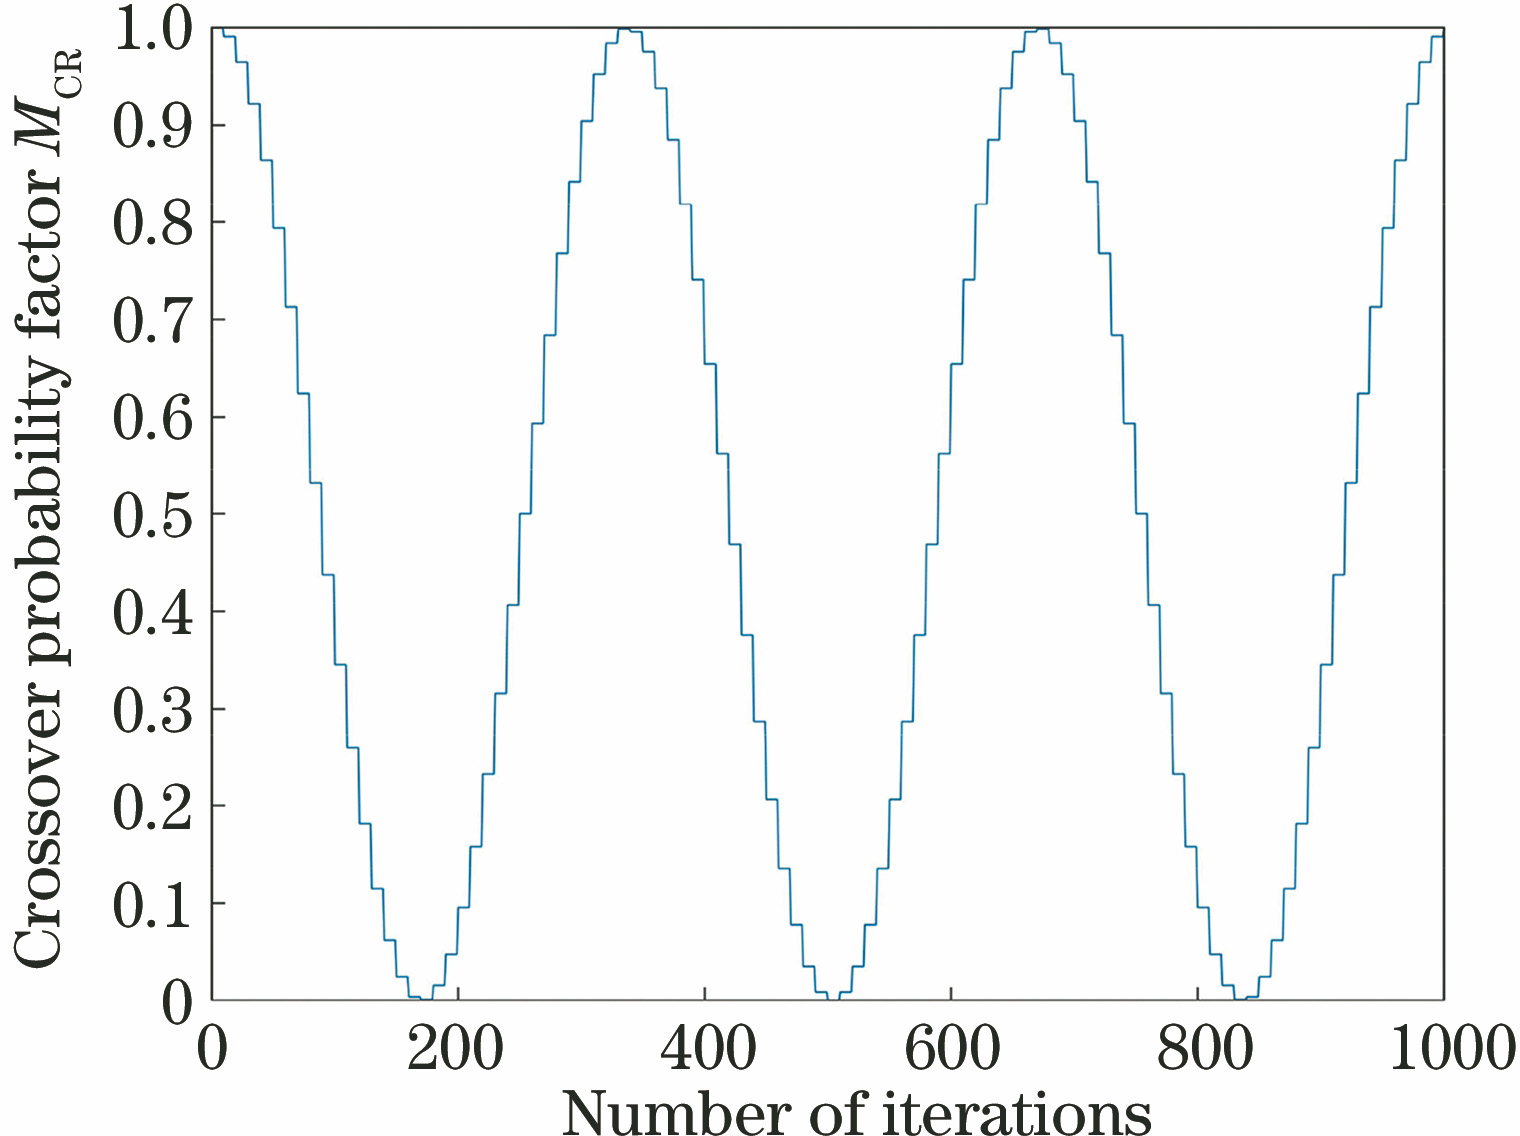 Improved crossover probability factor MCR varying with number of iterations